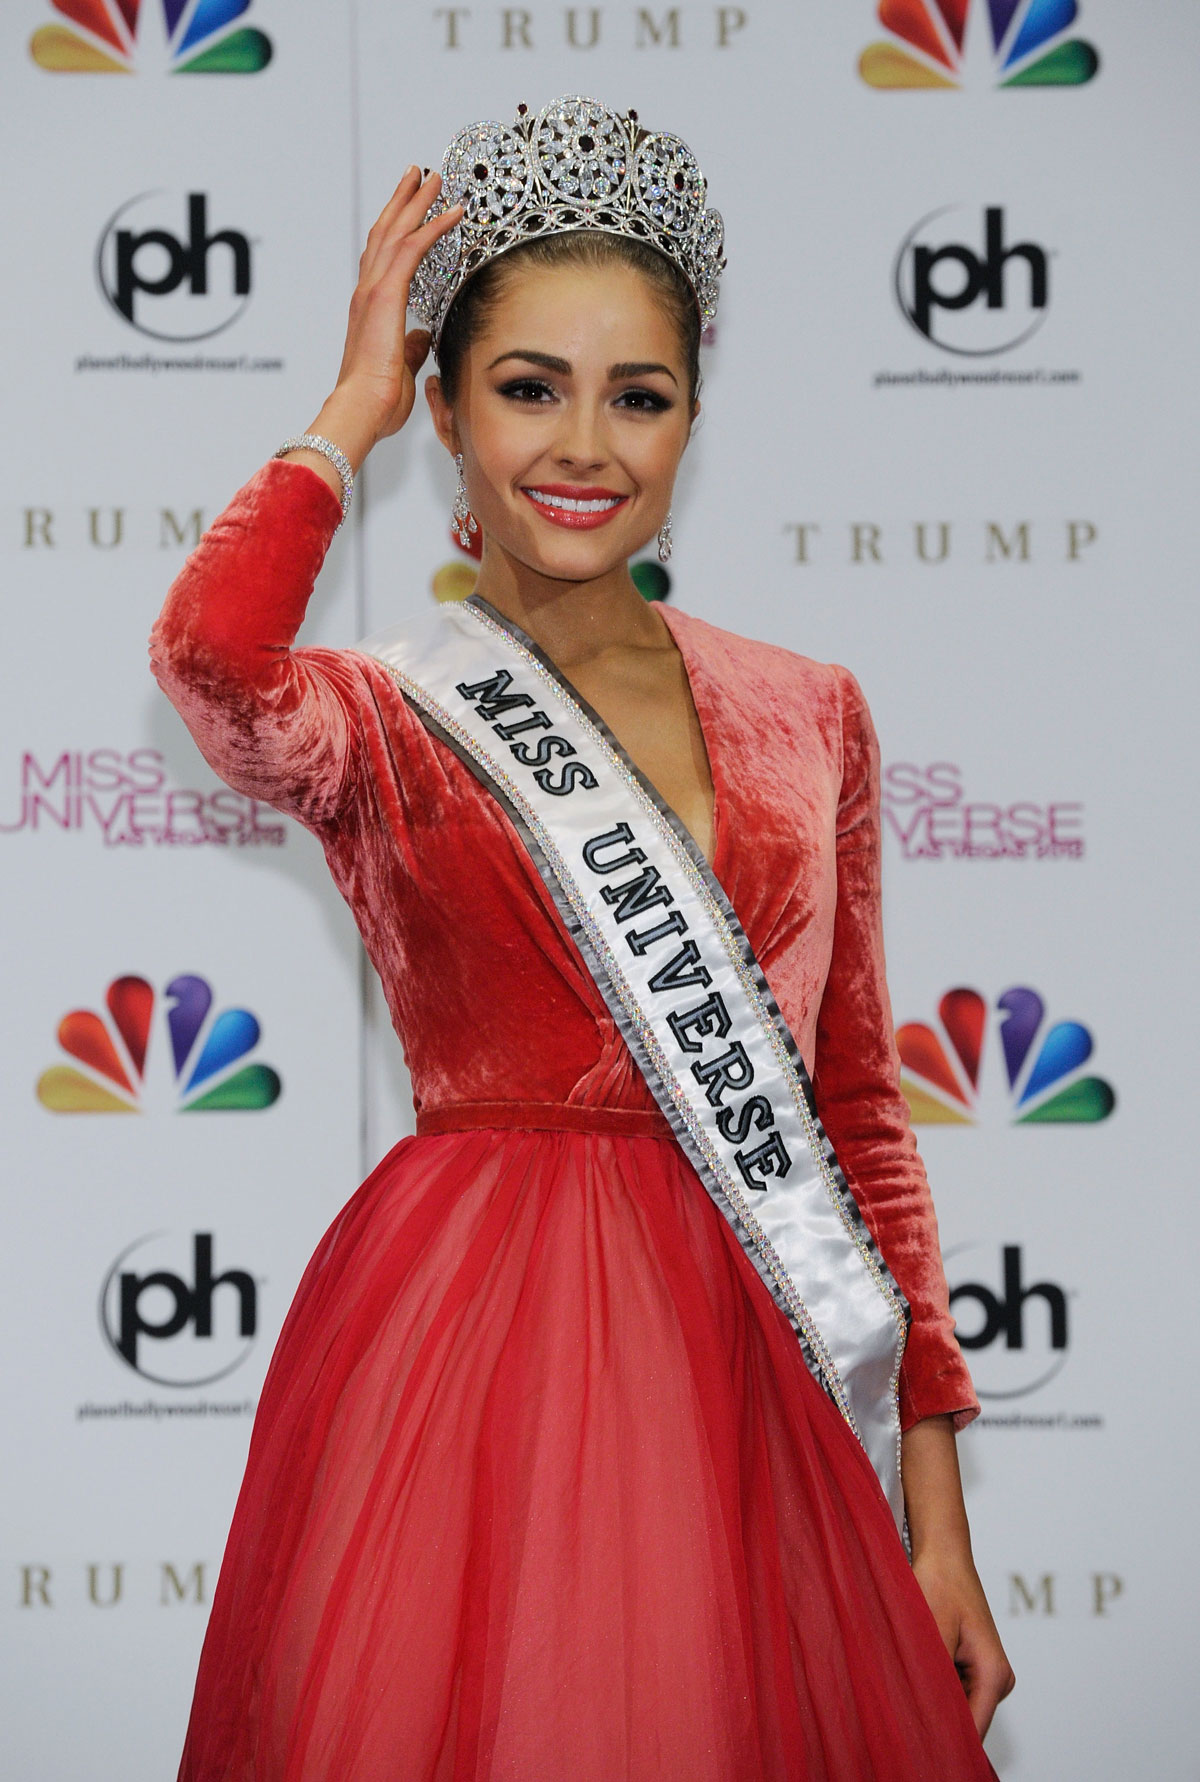 OLIVIA-CULPO-as-Miss-Universe-at-the-2012-Miss-Universe-Pageant-in-Las-Vegas-24.jpg